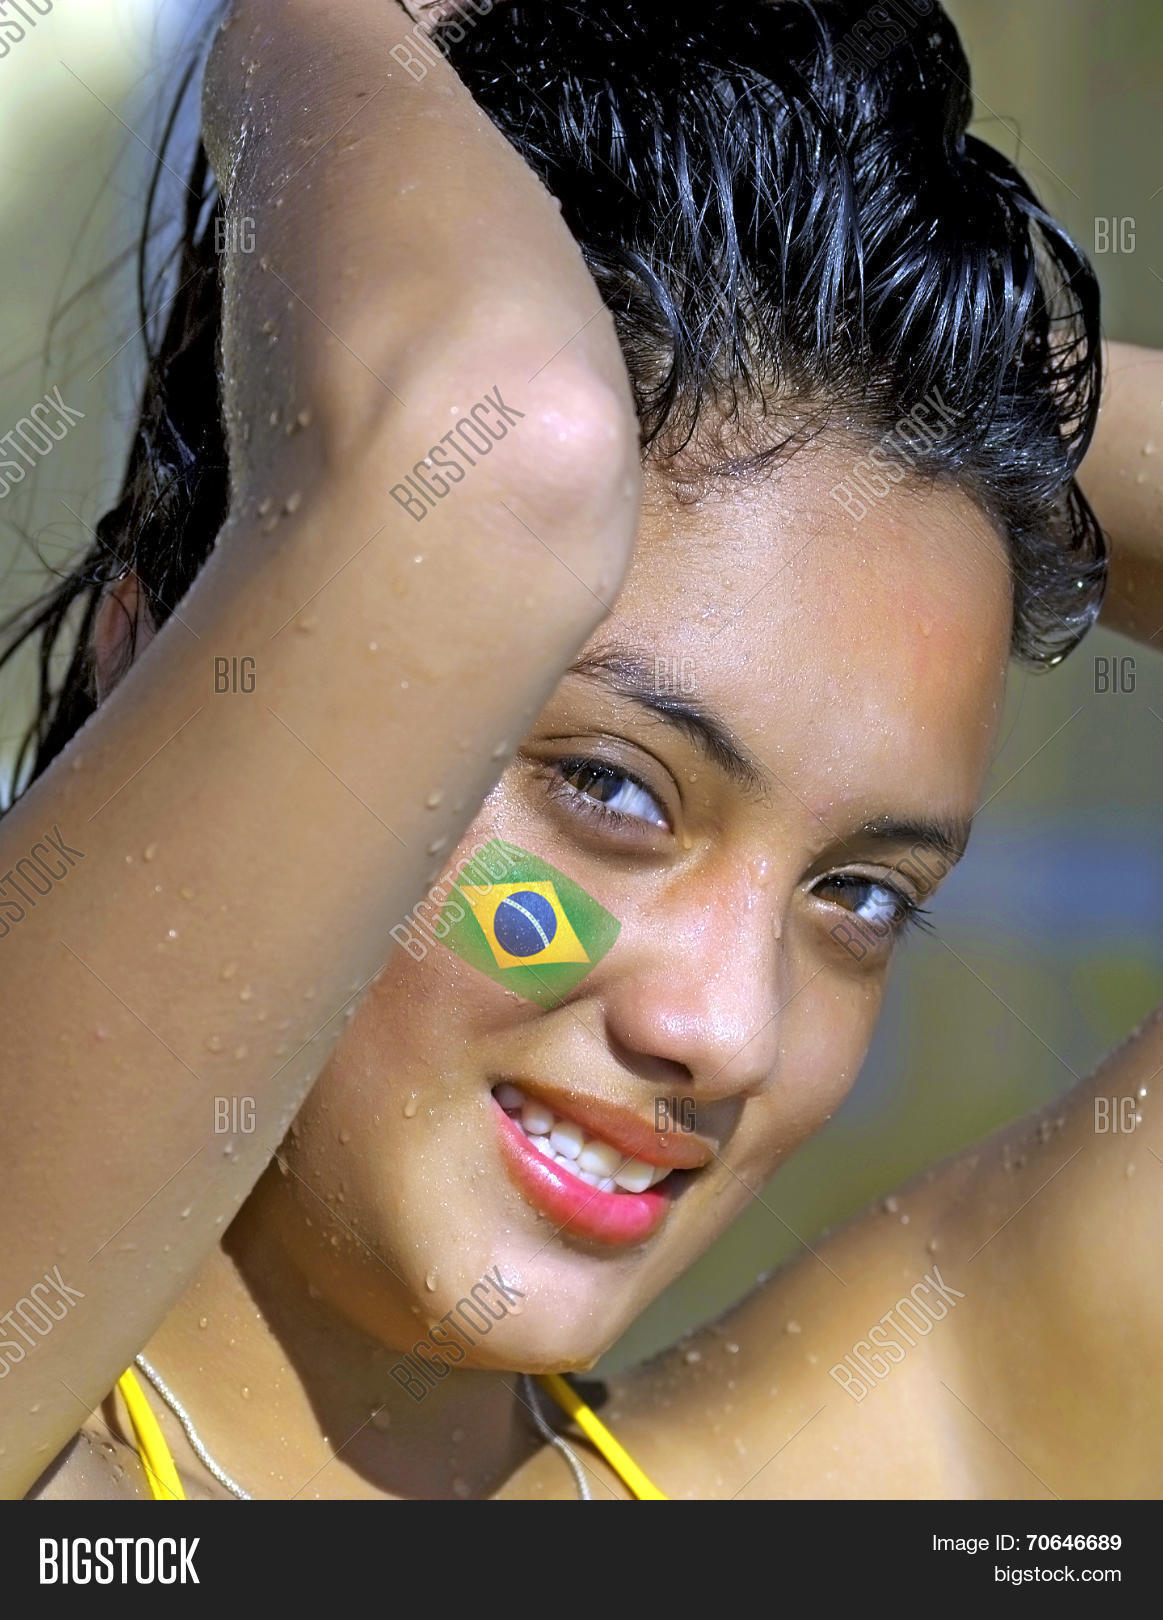 carl justine recommends Pictures Of Brazilian Girls